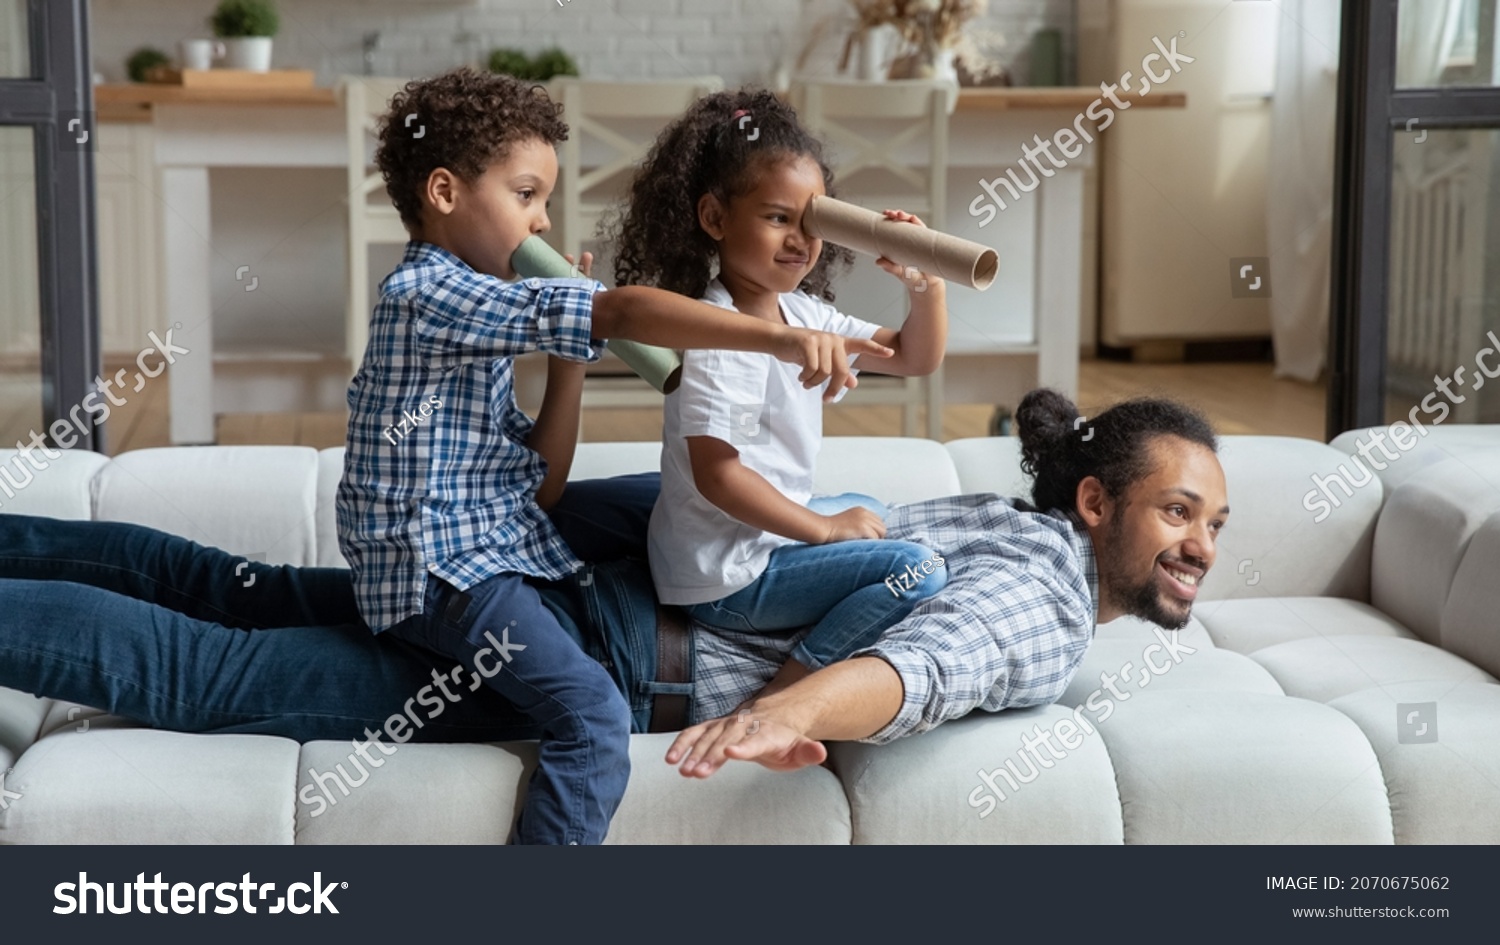 Happy African American daddy and little sibling kids playing funny active games on couch, Children sailing dad like pirate boat, holding paper toy spyglasses. Childhood, family, fatherhood #2070675062